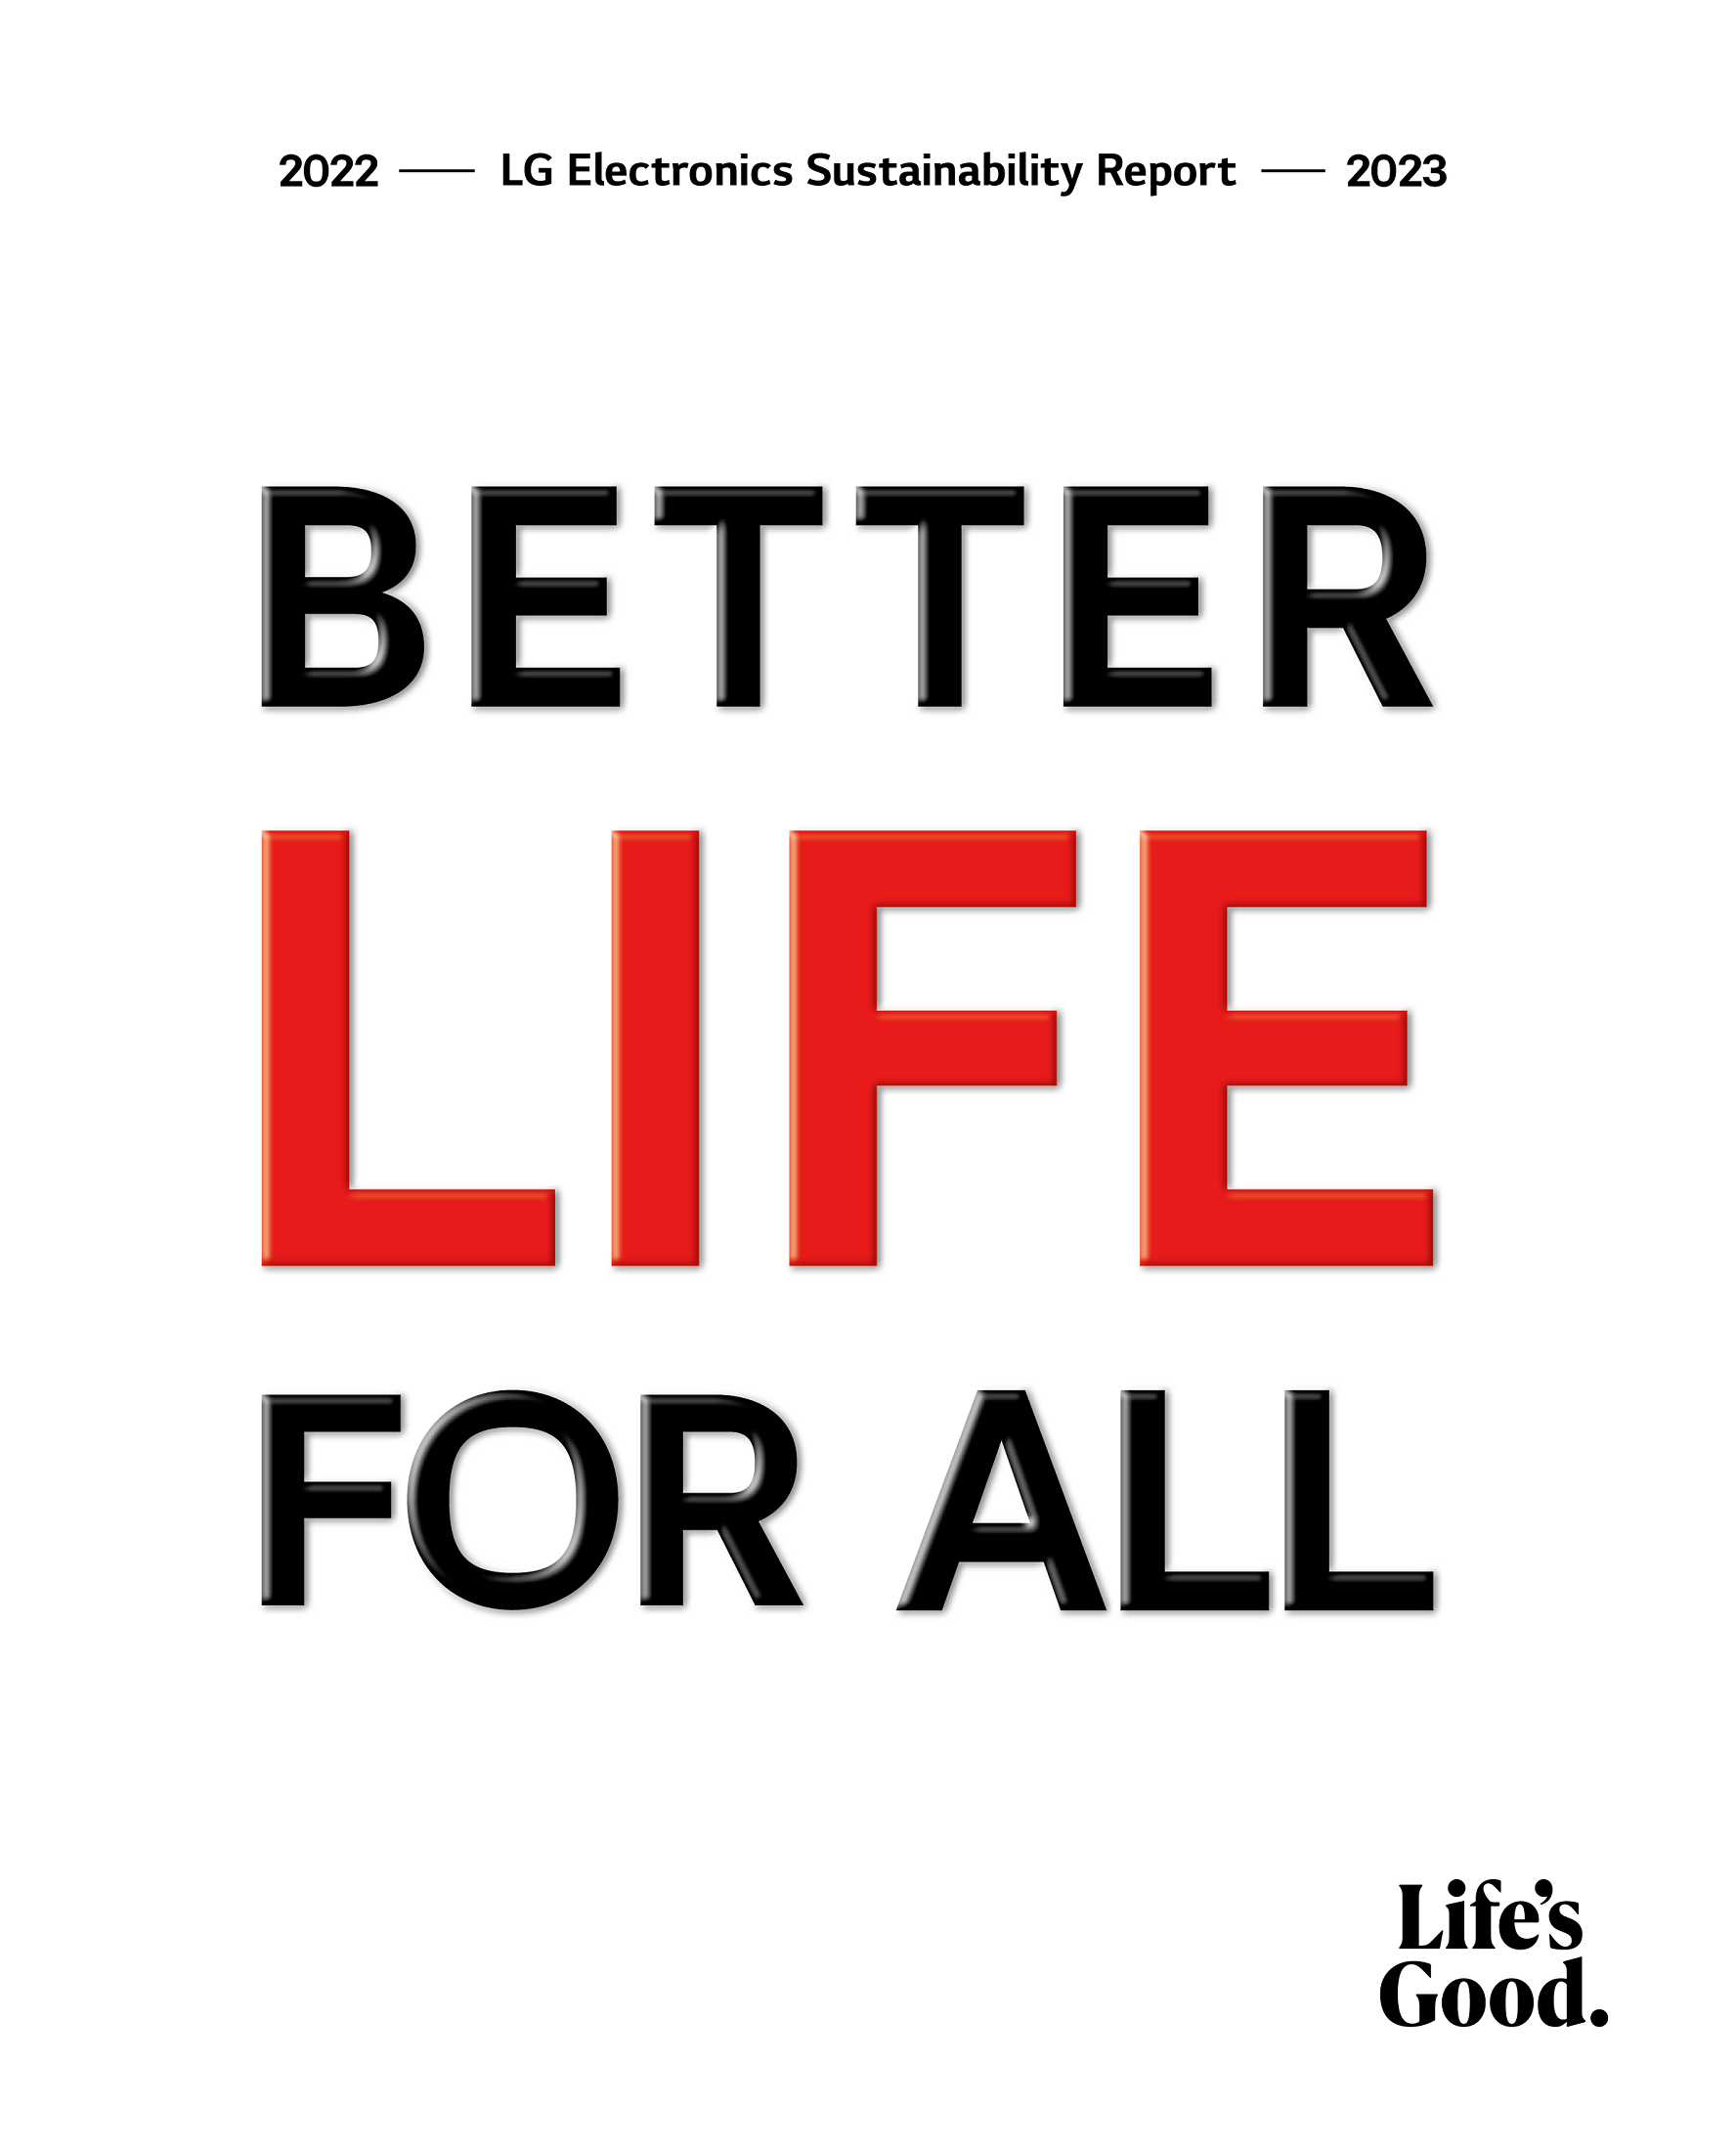 An illustration of a book titled 'BETTER LIFE FOR ALL' containing LG's ESG-related actions